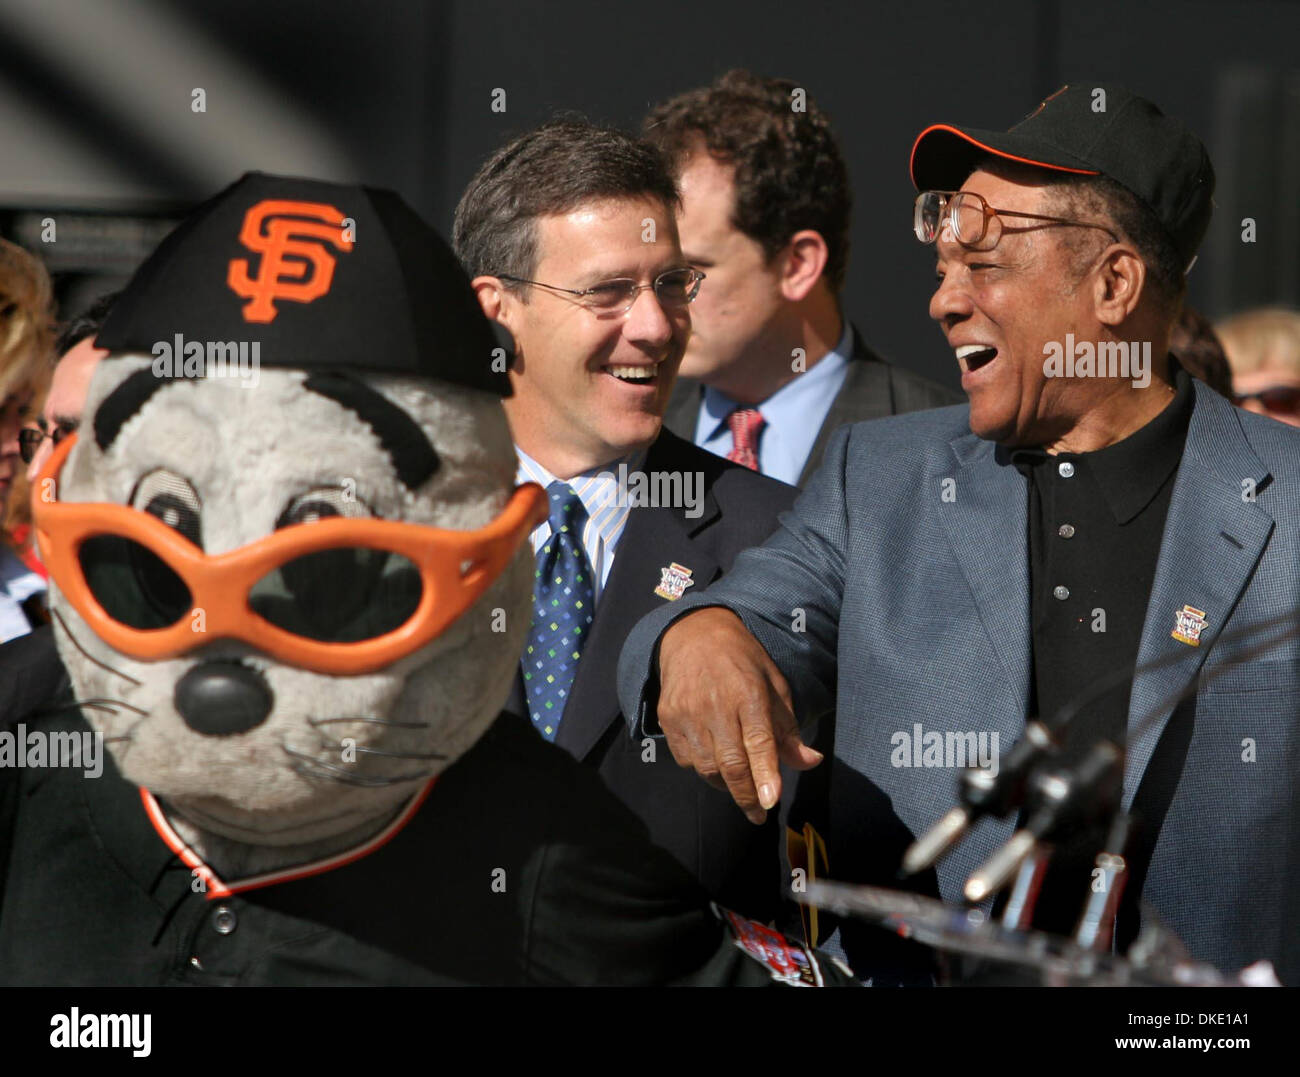 July 6th, 2007 - San Francisco, CA, USA -  Major League Baseball Executive Vice President Tim Brosnan, center, and DHL All-Star FanFest Ambassador and MLB legend Willie Mays are all smiles as San Francisco Giants' mascot Lou Seal walks away during the All-Star FanFest opening ceremony at Moscone West center in San Francisco, Calif., on Friday Jul. 6, 2007.  (Credit Image: © Ray Cha Stock Photo